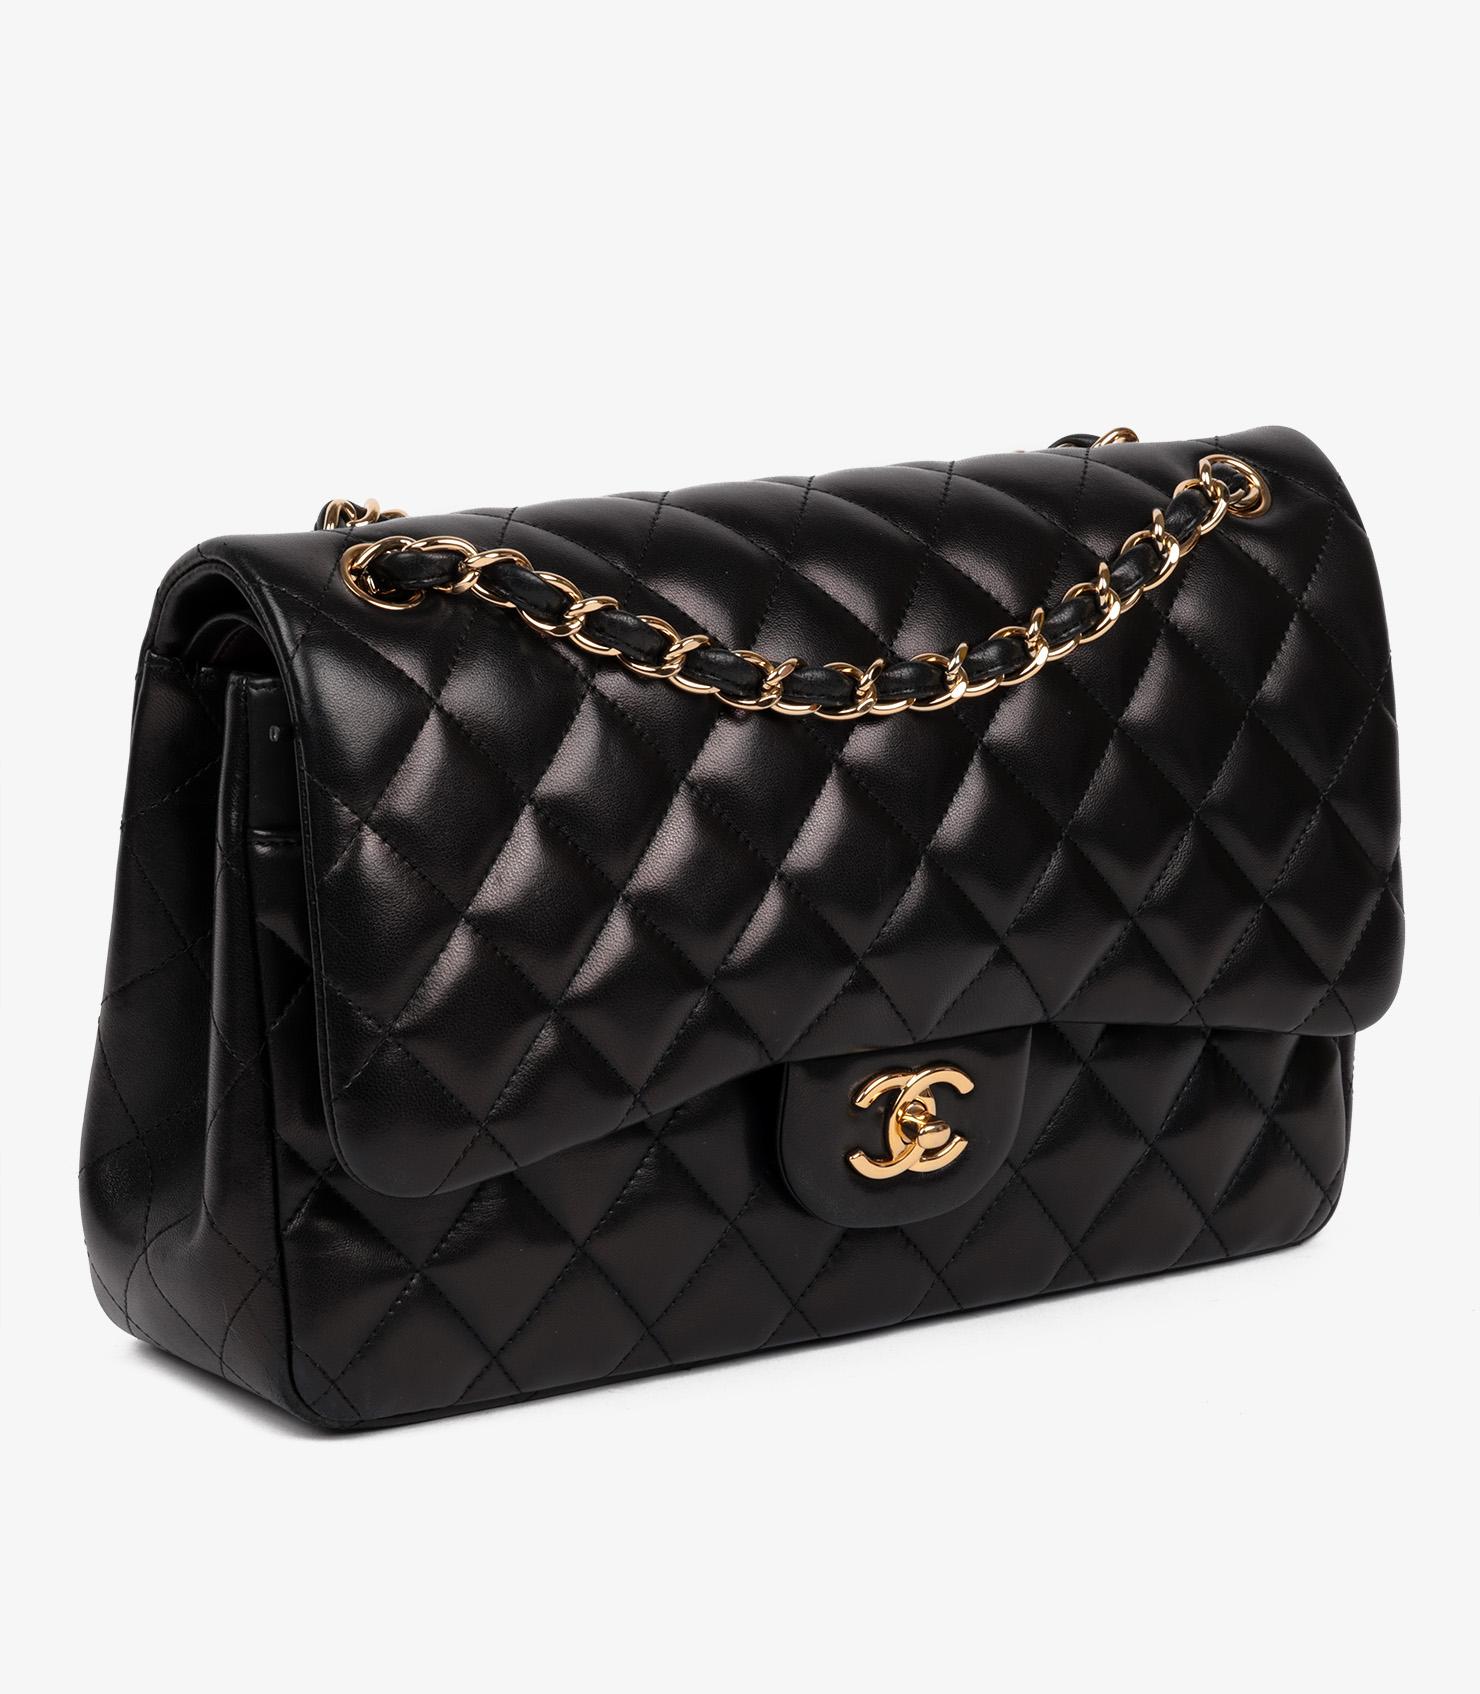 Brand- Chanel
Model- Jumbo Classic Double Flap Bag
Product Type- Shoulder
Serial Number- 16******
Age- Circa 2012
Accompanied By- Chanel Dust Bag, Authenticity Card
Colour- Black
Hardware- Gold
Material(s)- Lambskin Leather
Authenticity Details-